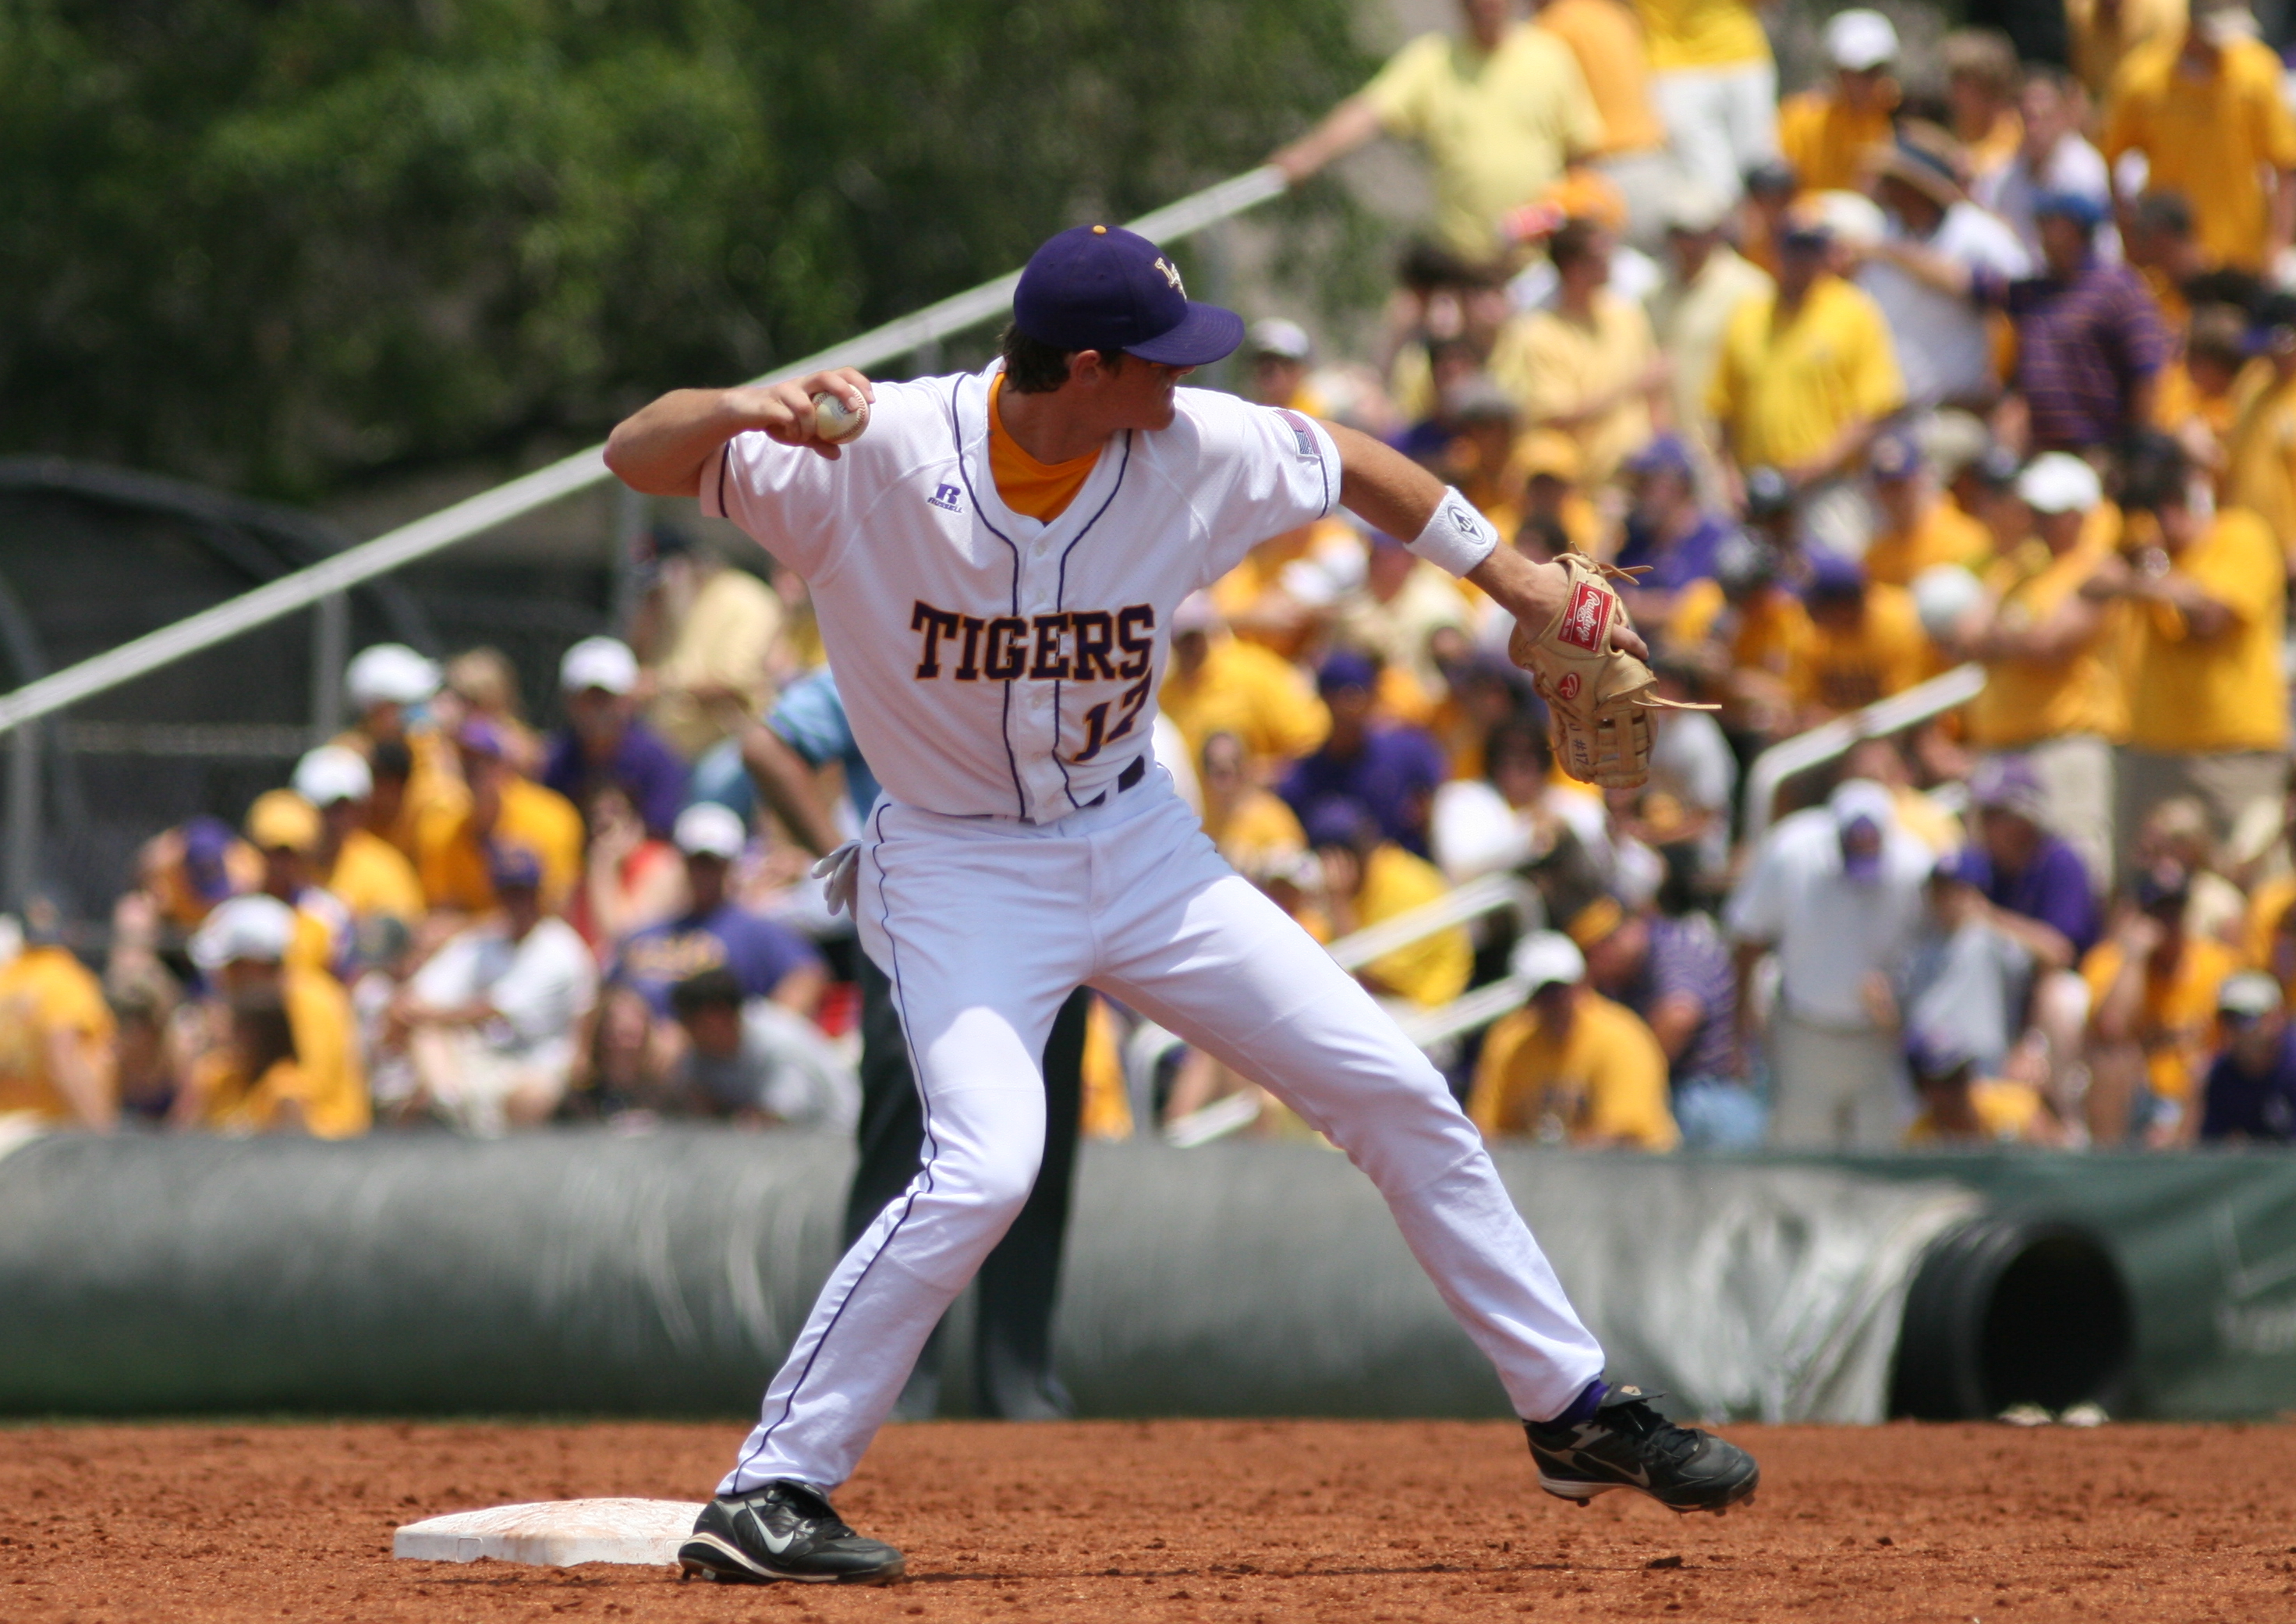 35 HQ Pictures Lsu Tigers Baseball Schedule / 2018 LSU Baseball Preview: The Lineup - And The Valley Shook